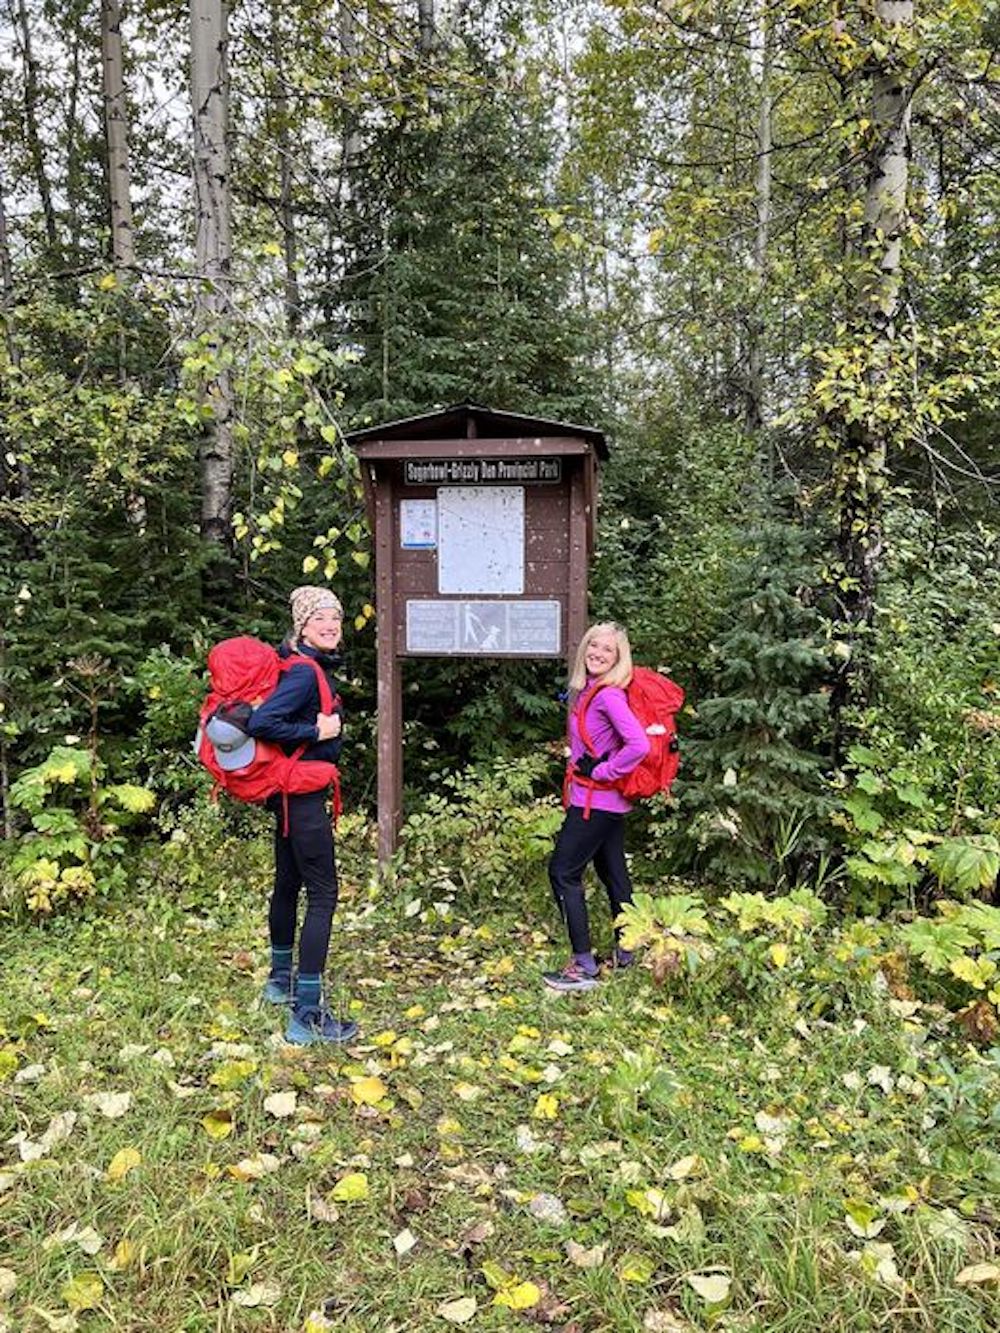 Two women wearing hiking clothes and red backpacks stand at the edge of a forested area, in front of a park sign that reads ‘Sugarbowl-Grizzly Den Park.’